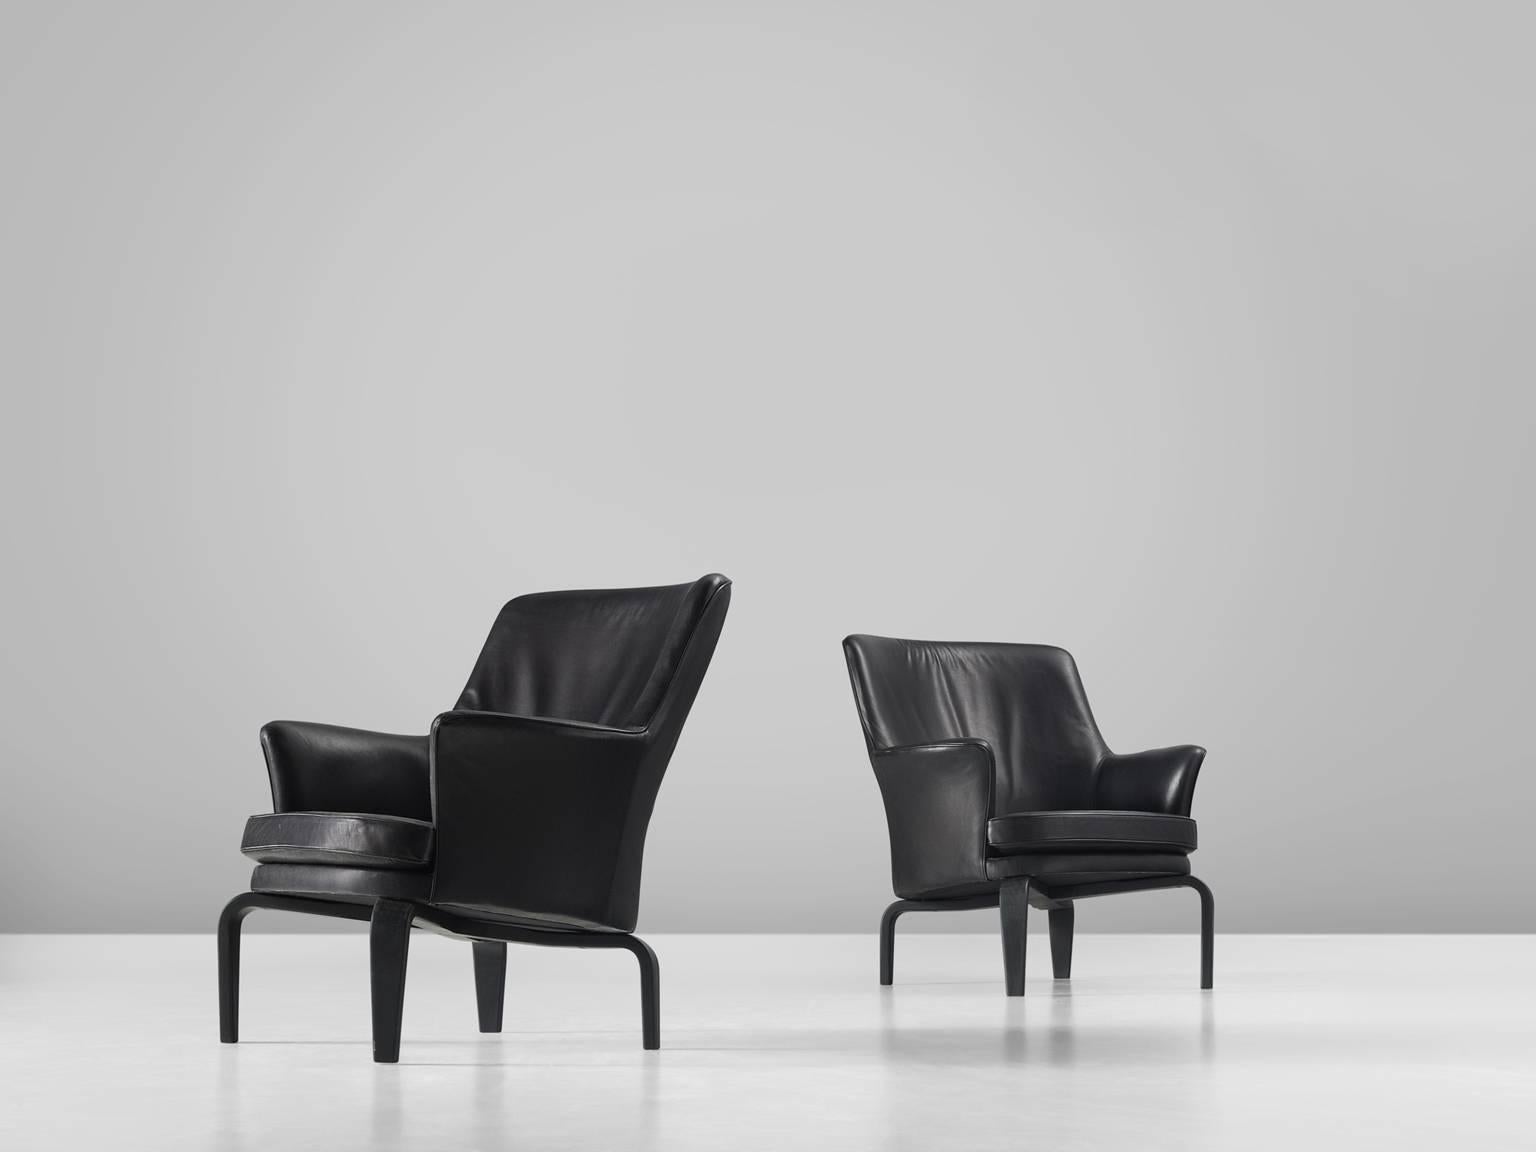 Arne Norell for Norell mobilier, 'Pilot T184' armchairs with leather and stained beech, Sweden, 1970s. 

This set of high back chairs are slightly curved and have a high headrest. They are upholstered entirely with very high quality aniline black